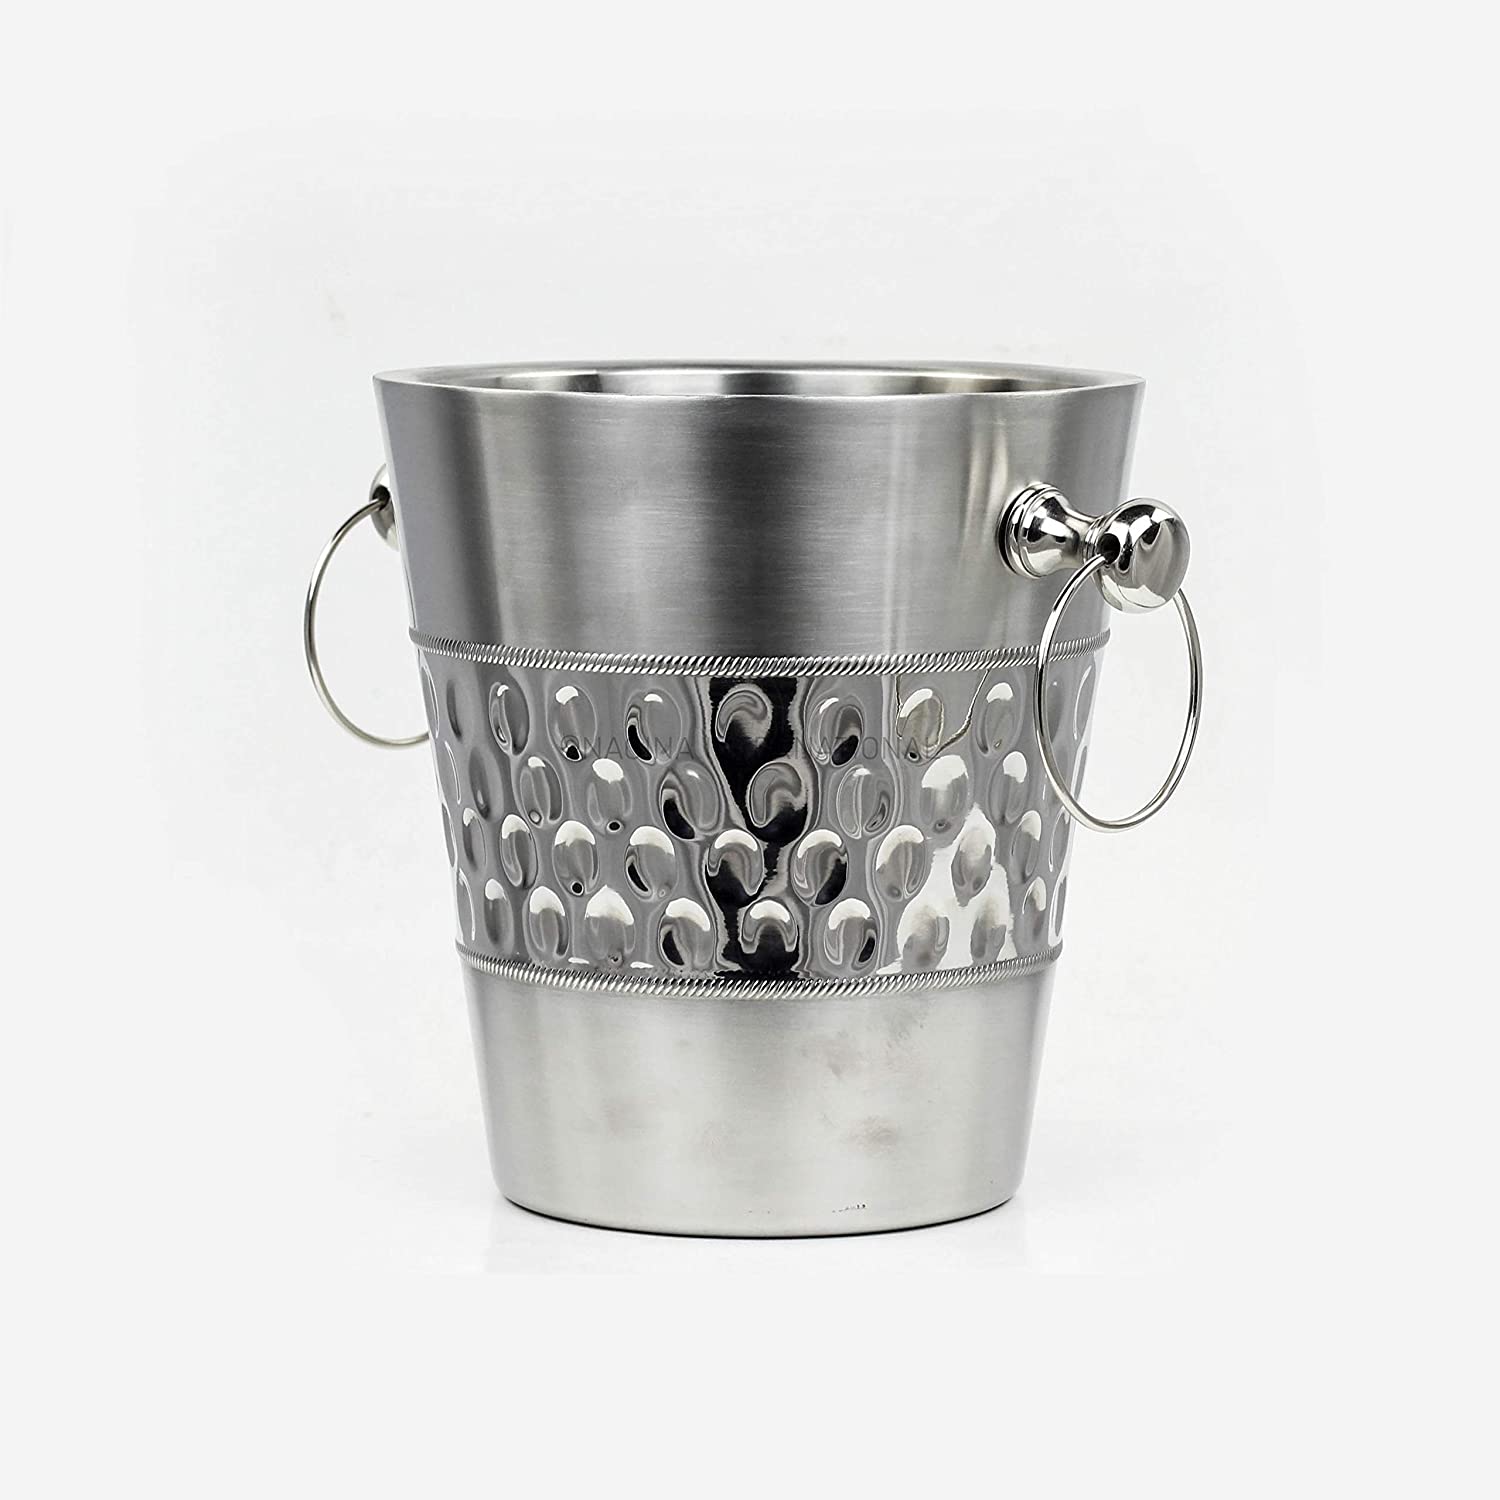 Taluka Deep Hammered Double Walled Insulated Brushed Nickel Plated Majestic Wine and Ice Bucket with Steel Bucket Stand Wine Chiller On Stand Kitchenware Bar Ware